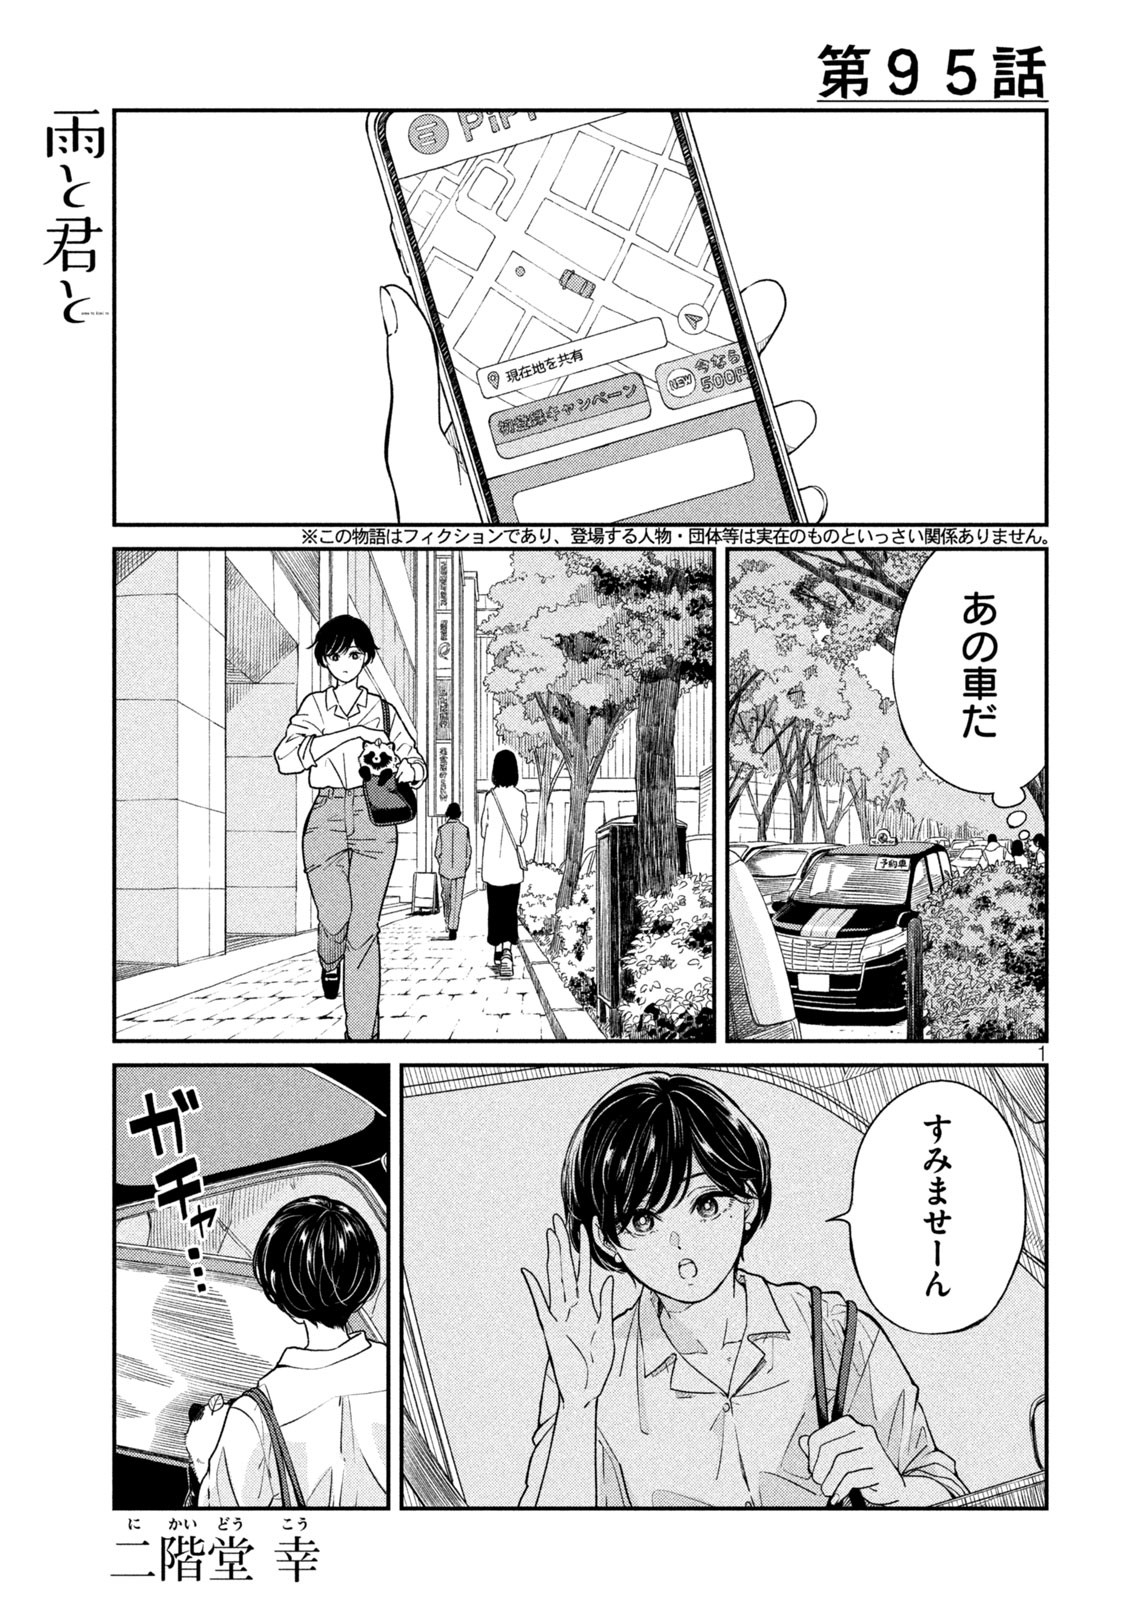 Ame to Kimi to - Chapter 95 - Page 1